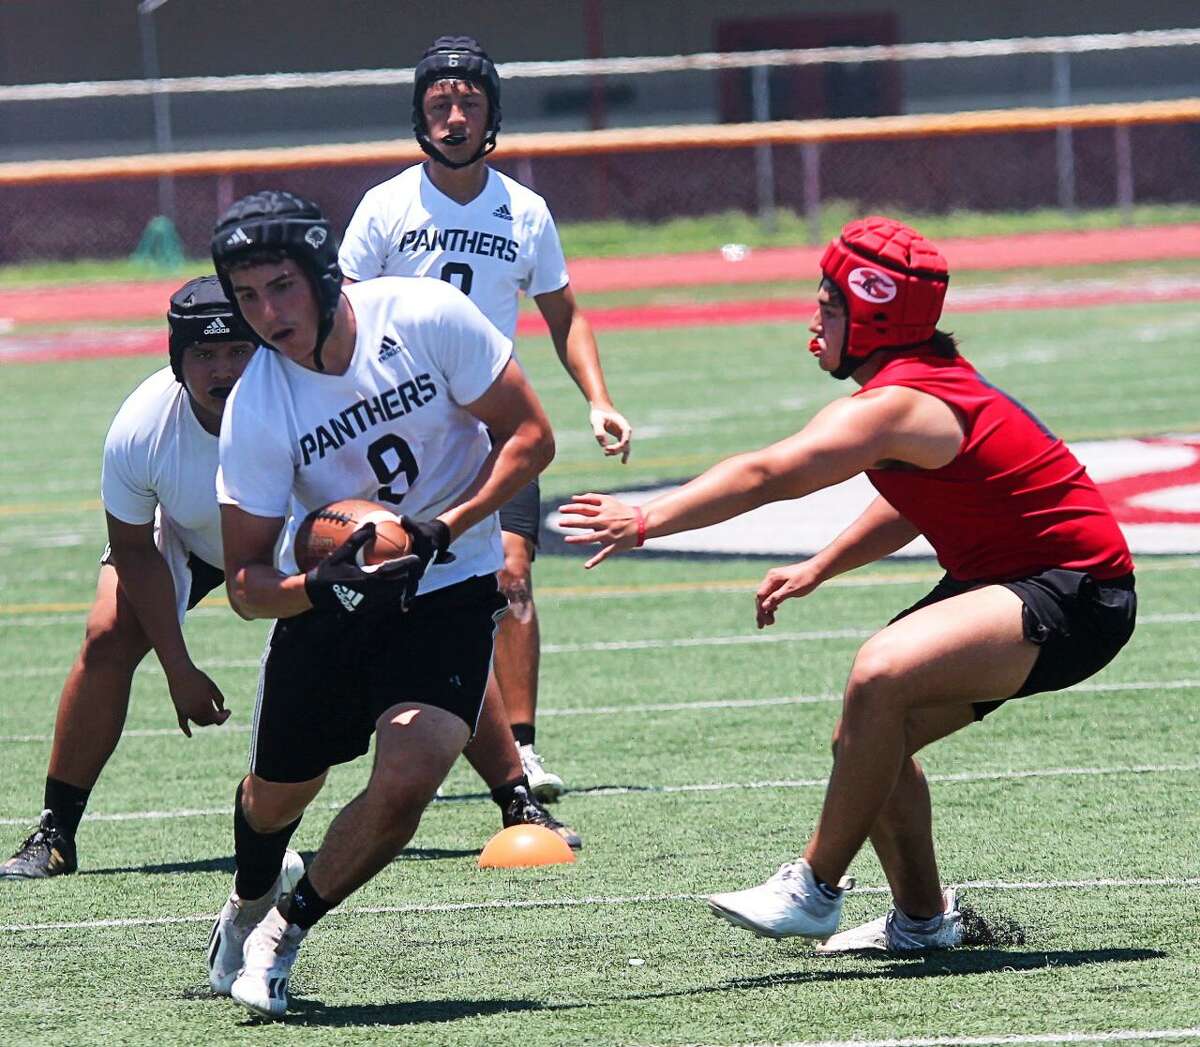 United South won its bracket by going 3-0 on Saturday at a 7-on-7 tournament in Mission, but it came up just short of state qualification falling to Mission Sharyland 26-21.